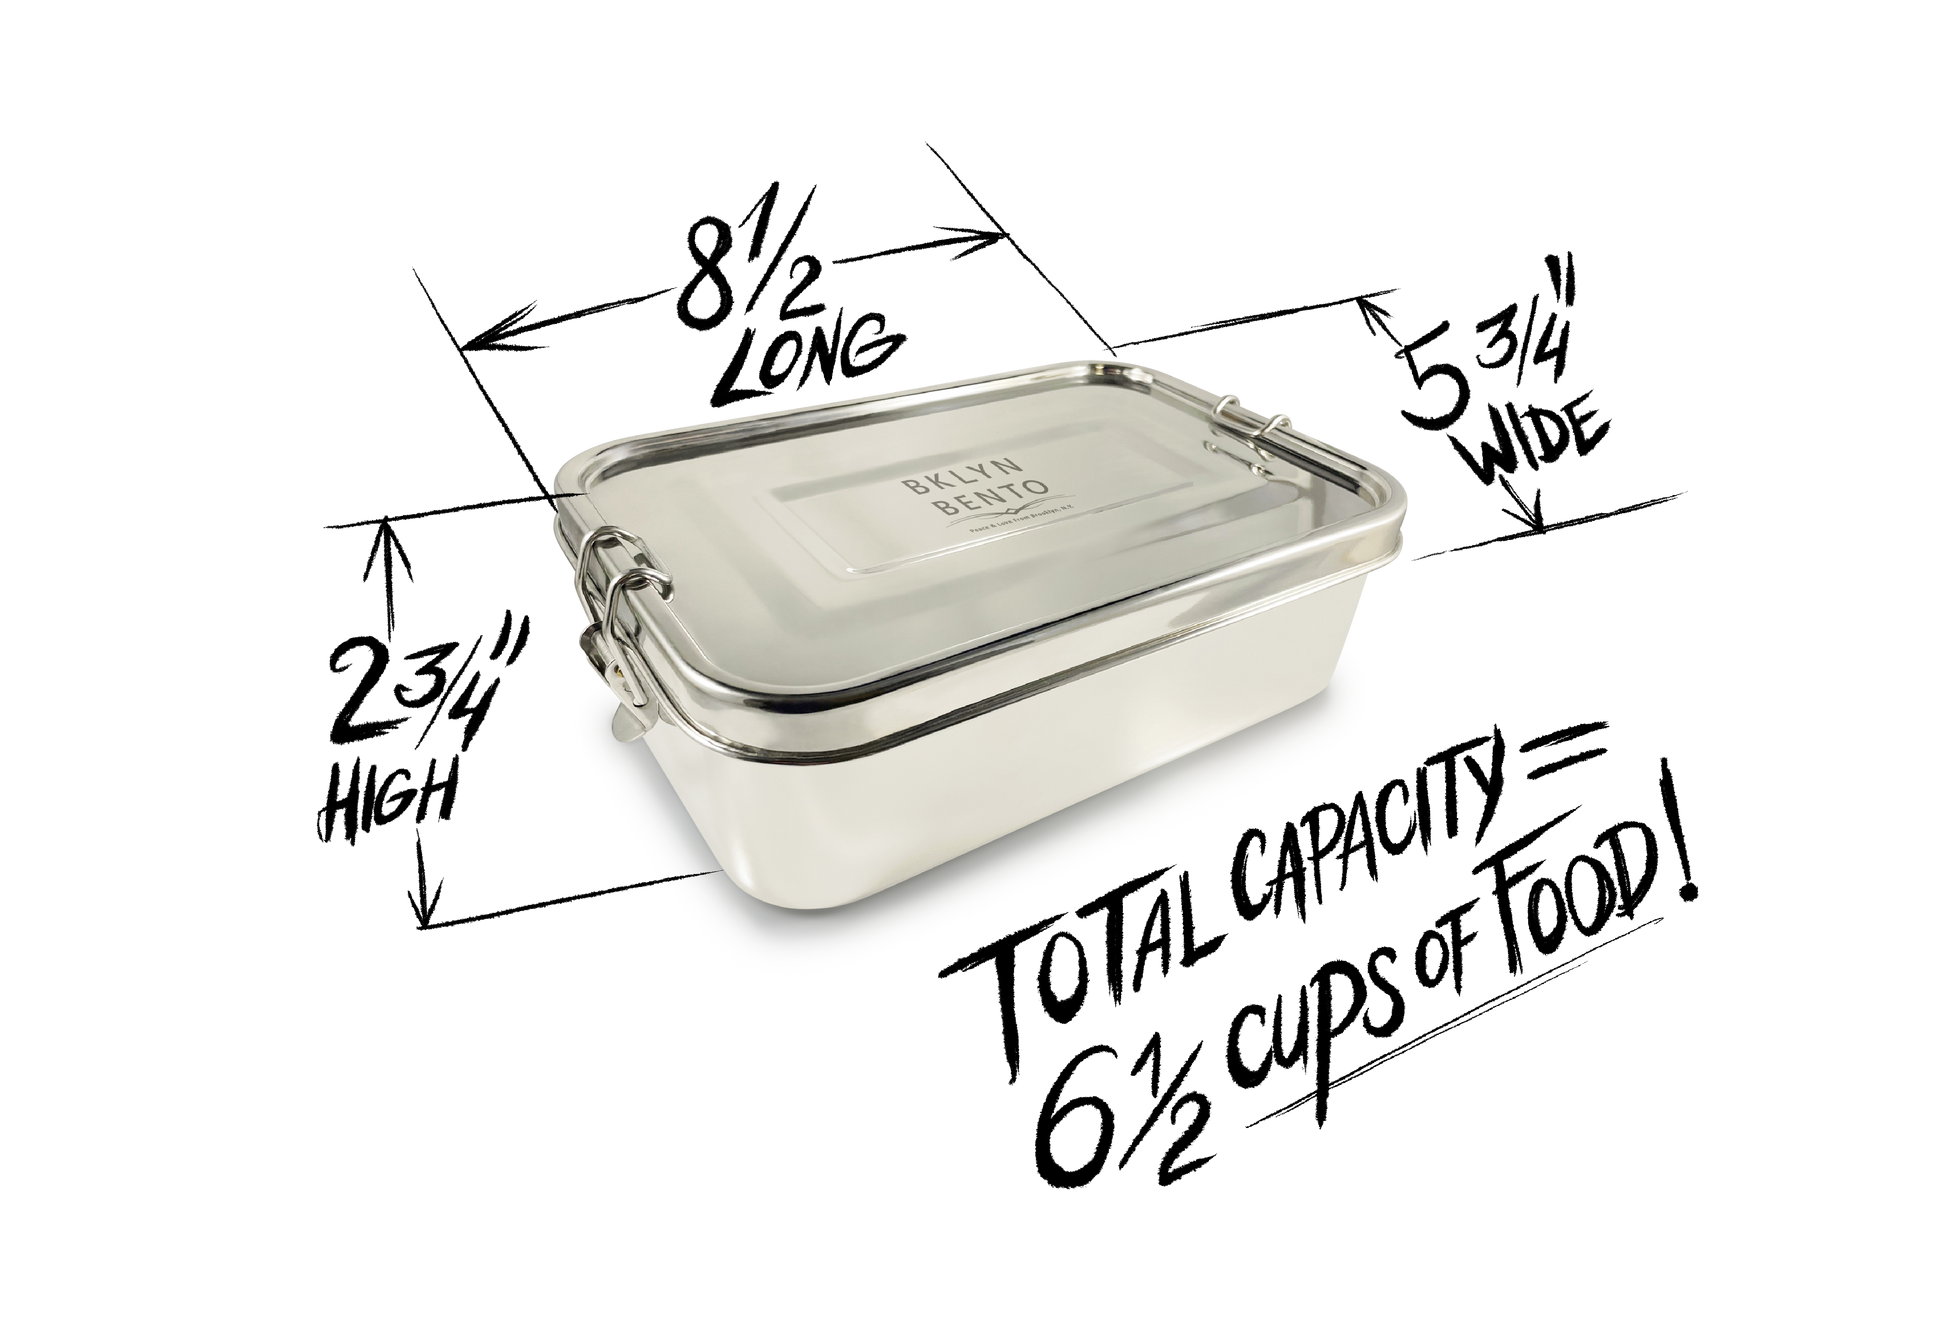 Bklyn Bento Box 100% Stainless Steel Lunch Box for Kids and Adults 3 in 1 - Metal Food Container